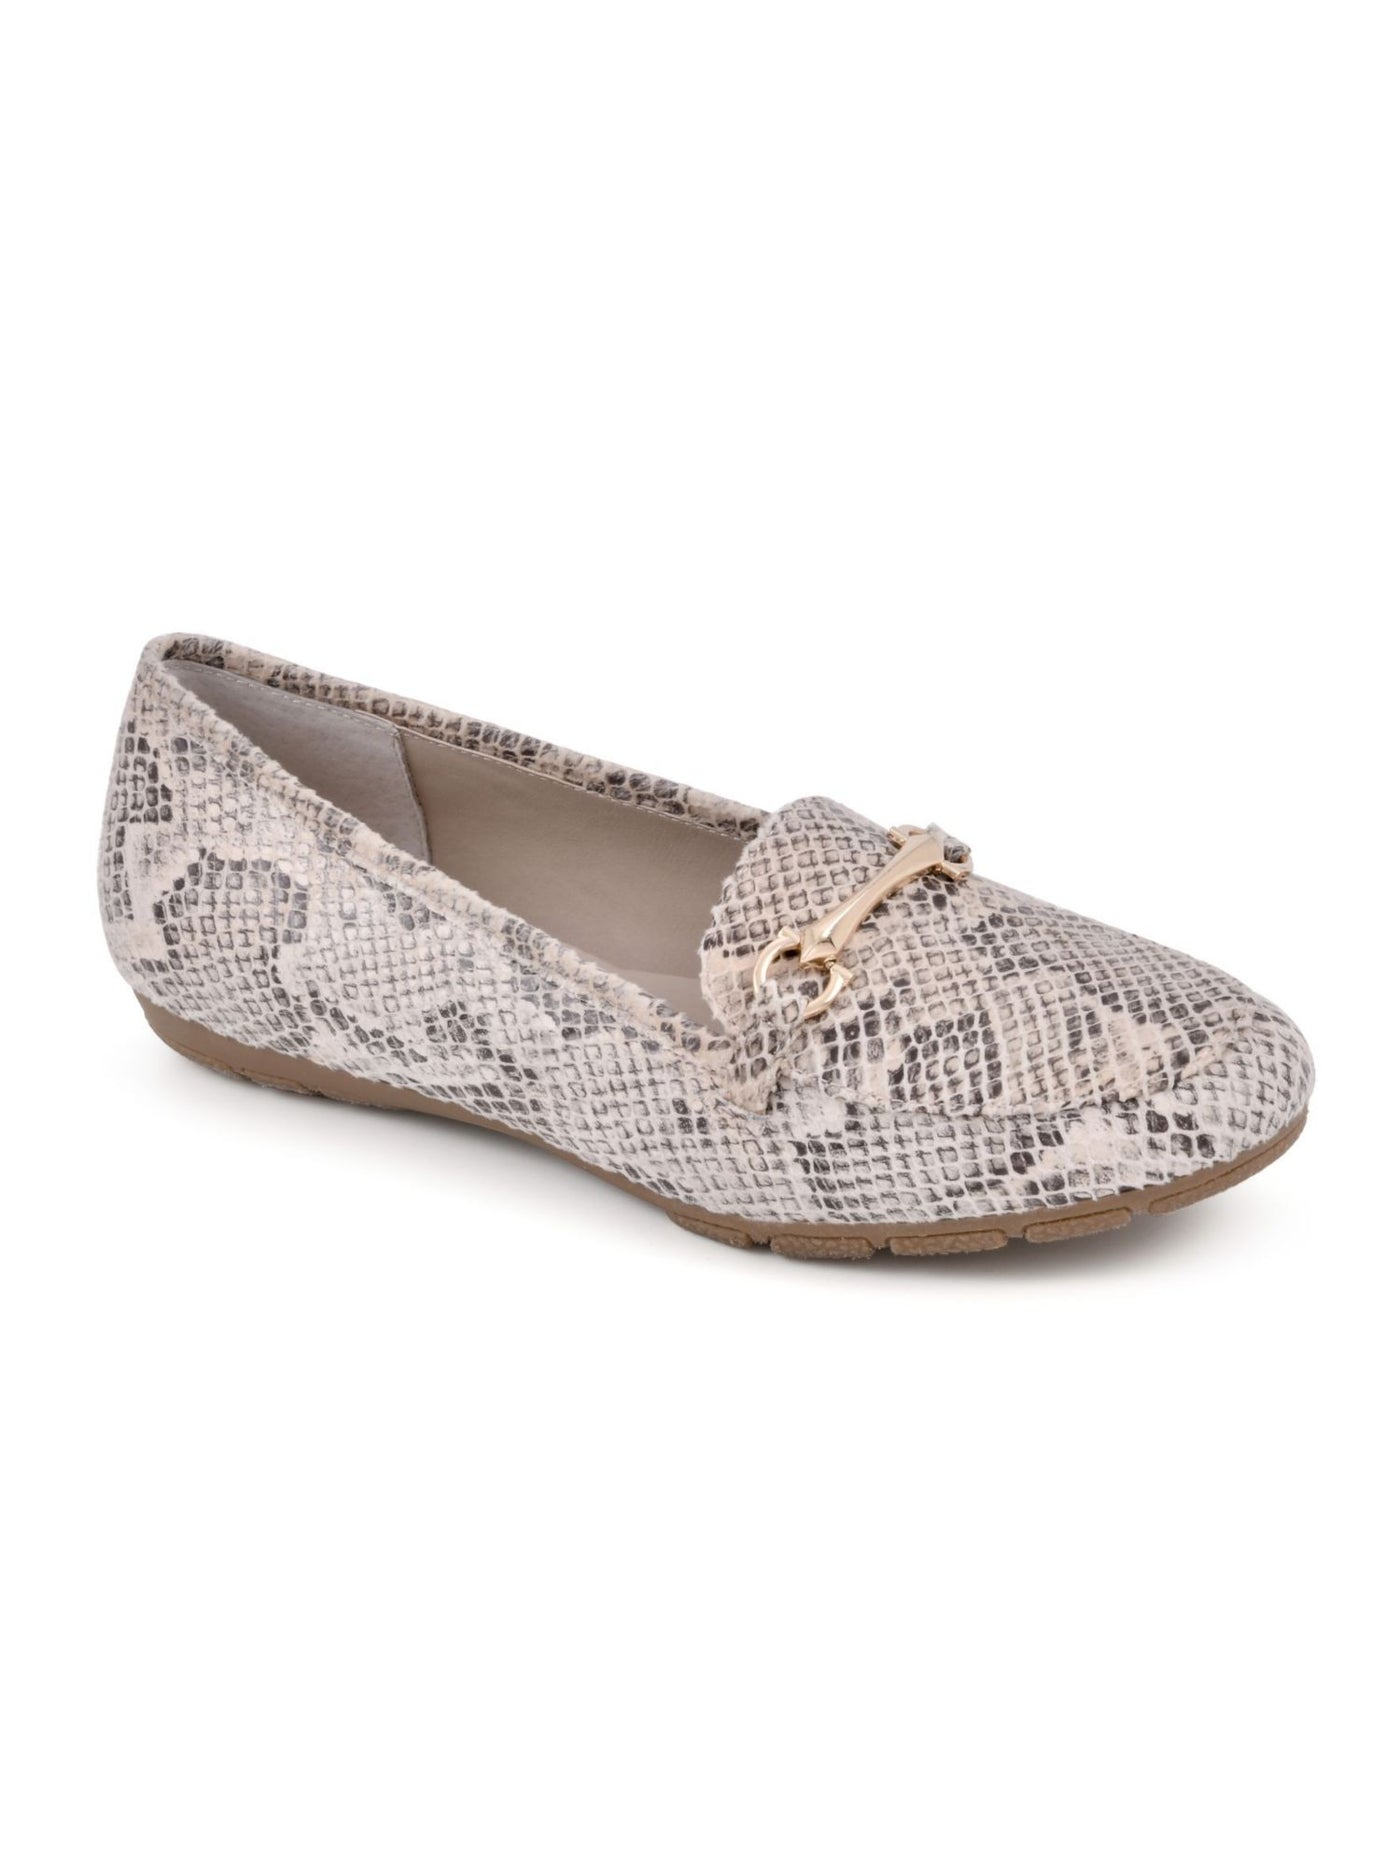 RIALTO Womens Beige Snake Print Metallic Bit Comfort Padded Treaded Guiding Round Toe Slip On Loafers Shoes 9 W